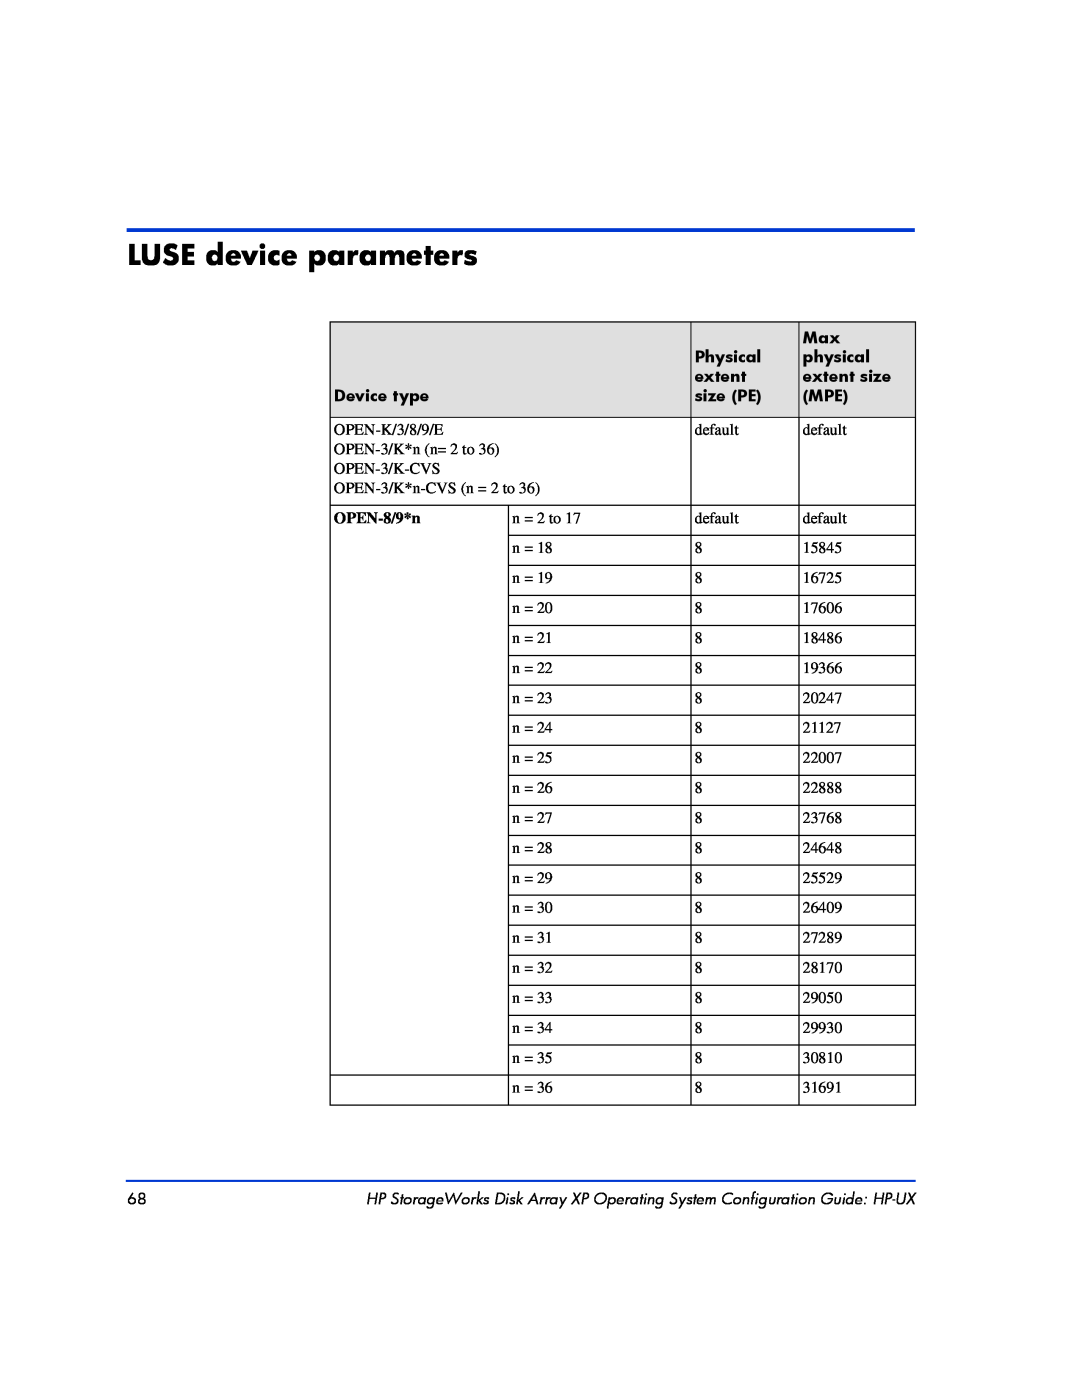 HP XP128, XP10000 manual LUSE device parameters, Physical, physical, extent size, Device type, size PE, OPEN-8/9*n 